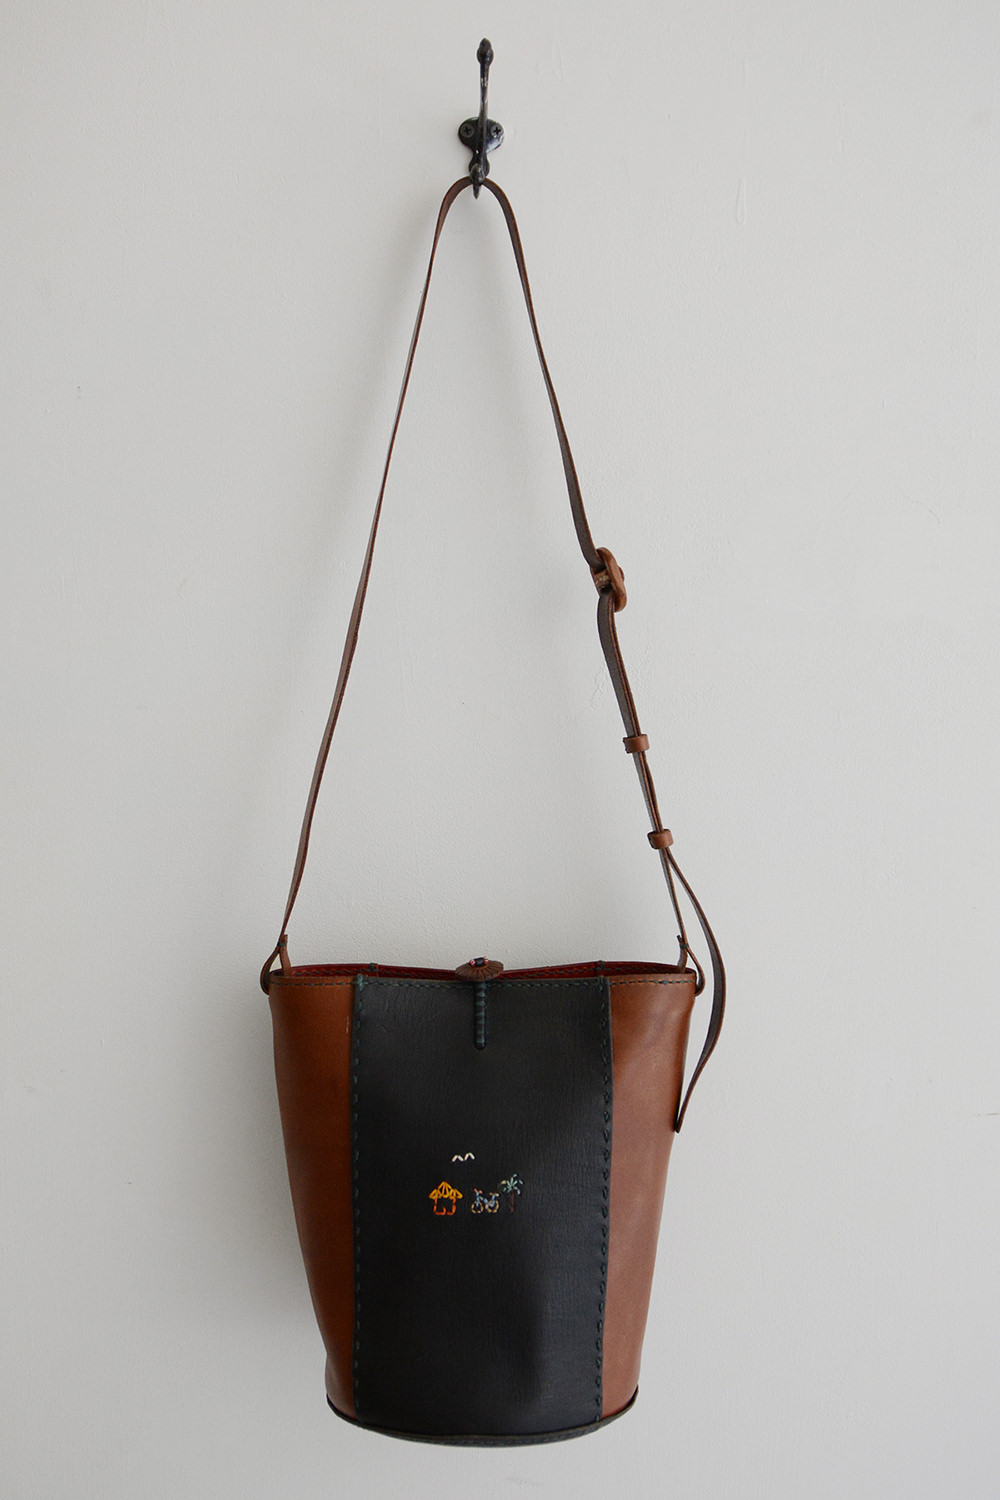 Henri、アンリ、leather goods、handcrafted leather、革小物、ハンドクラフト、Shoulder bag、ショルダーバッグ、bag、バッグ、made in Italy